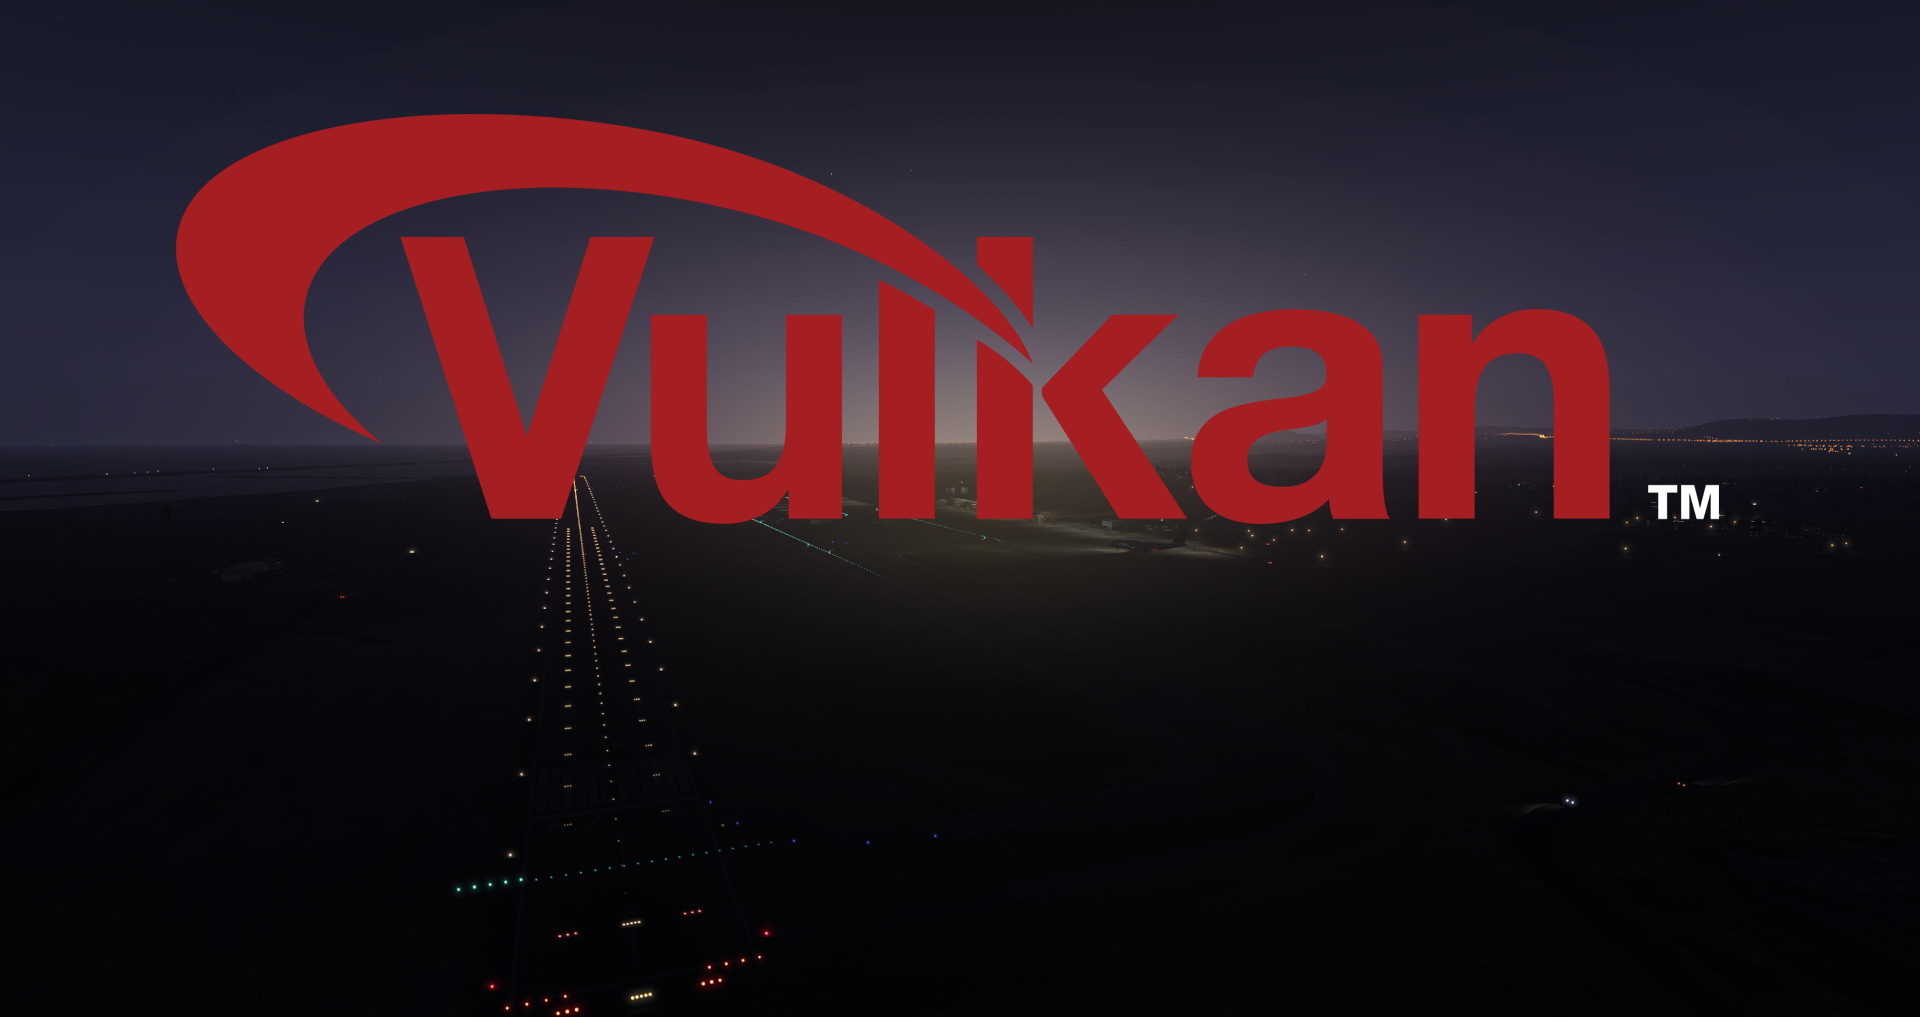 Vulkan is the next big thing for the flight sim industry